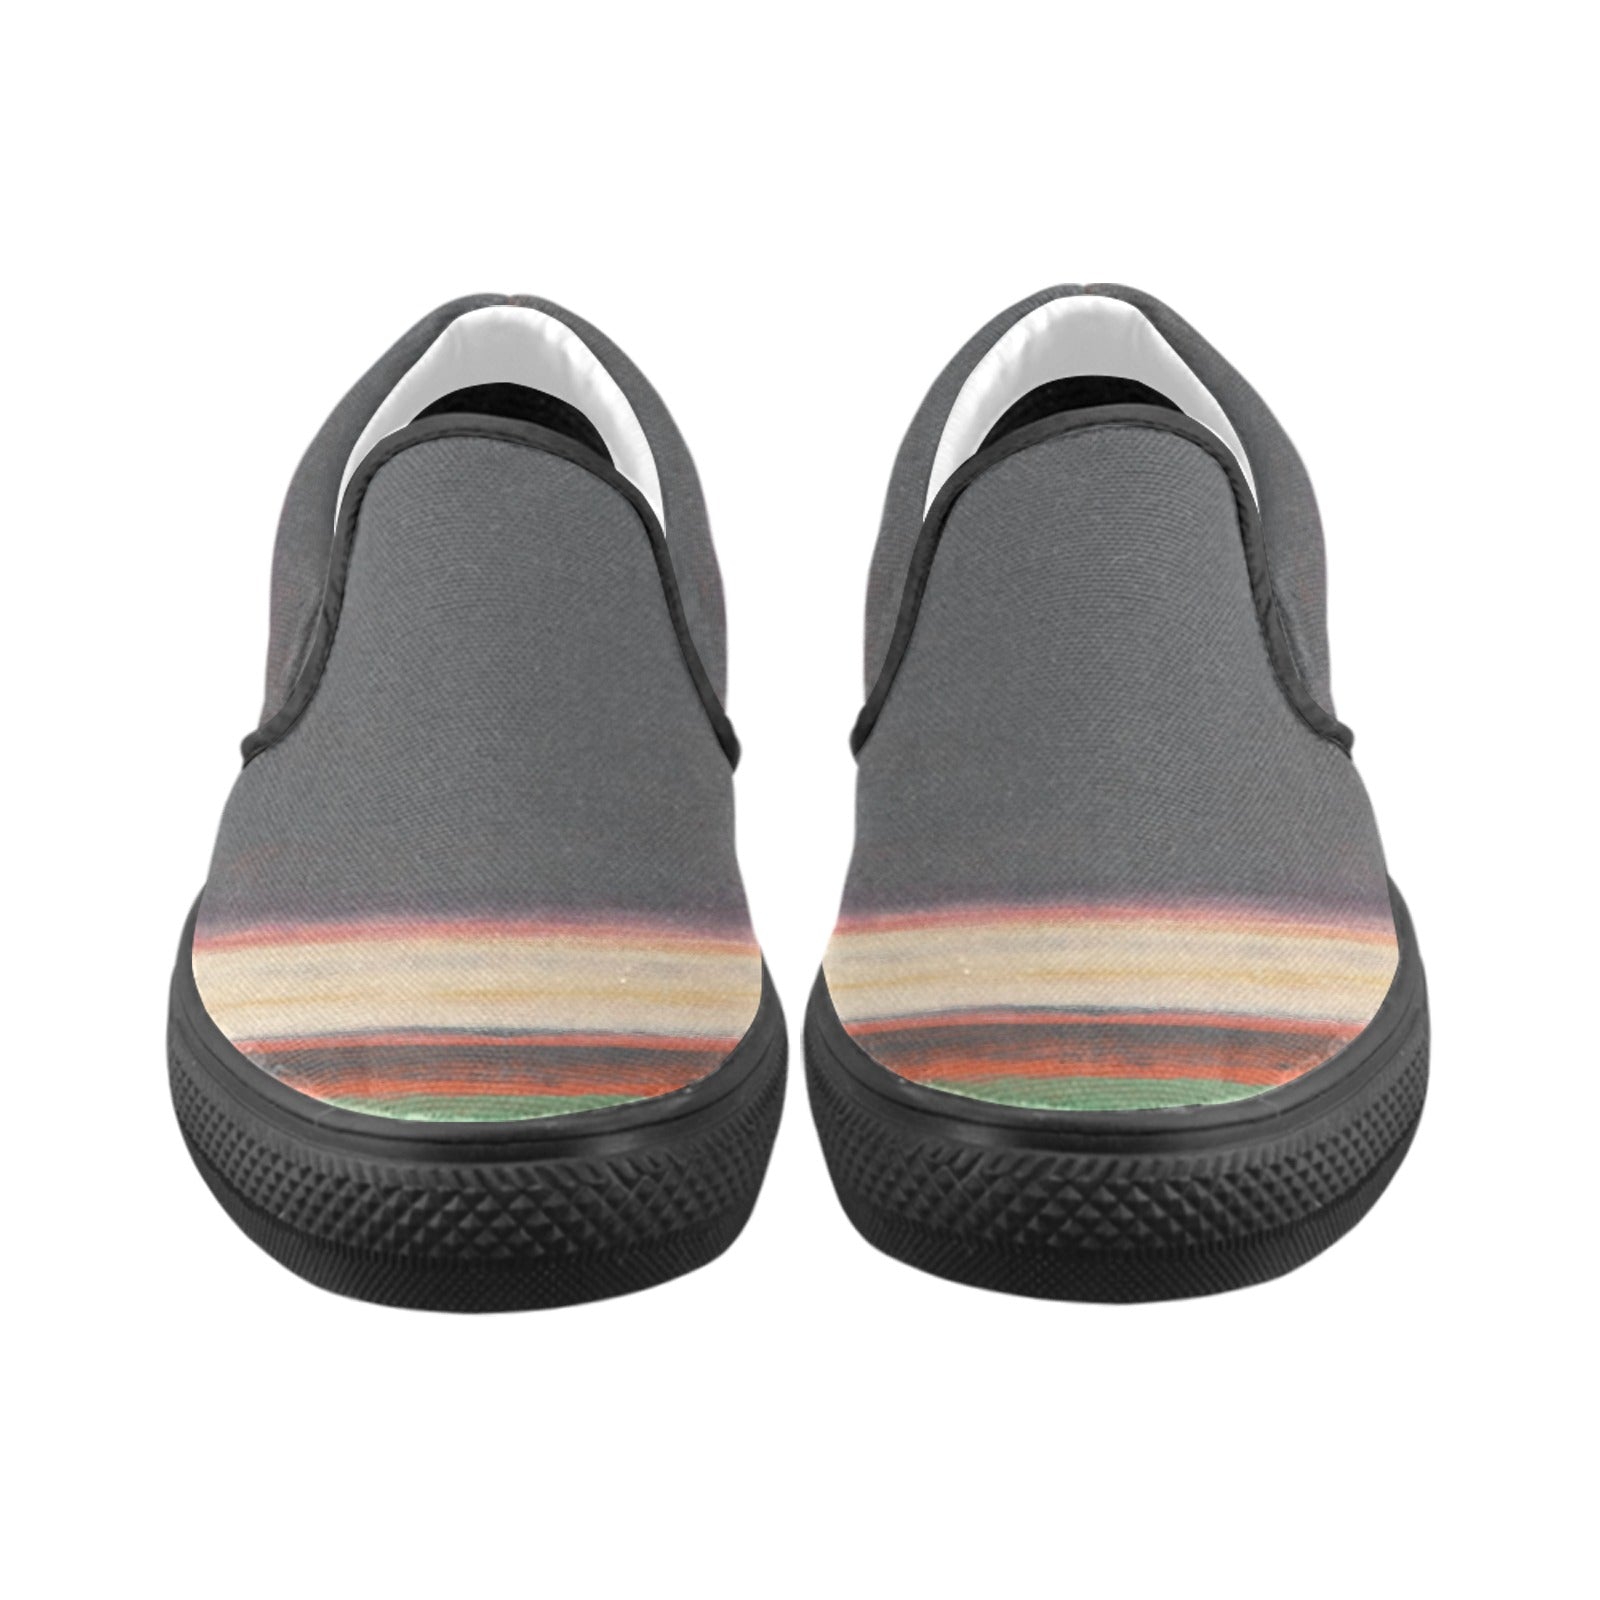 a pair of gray shoes with a multicolored stripe